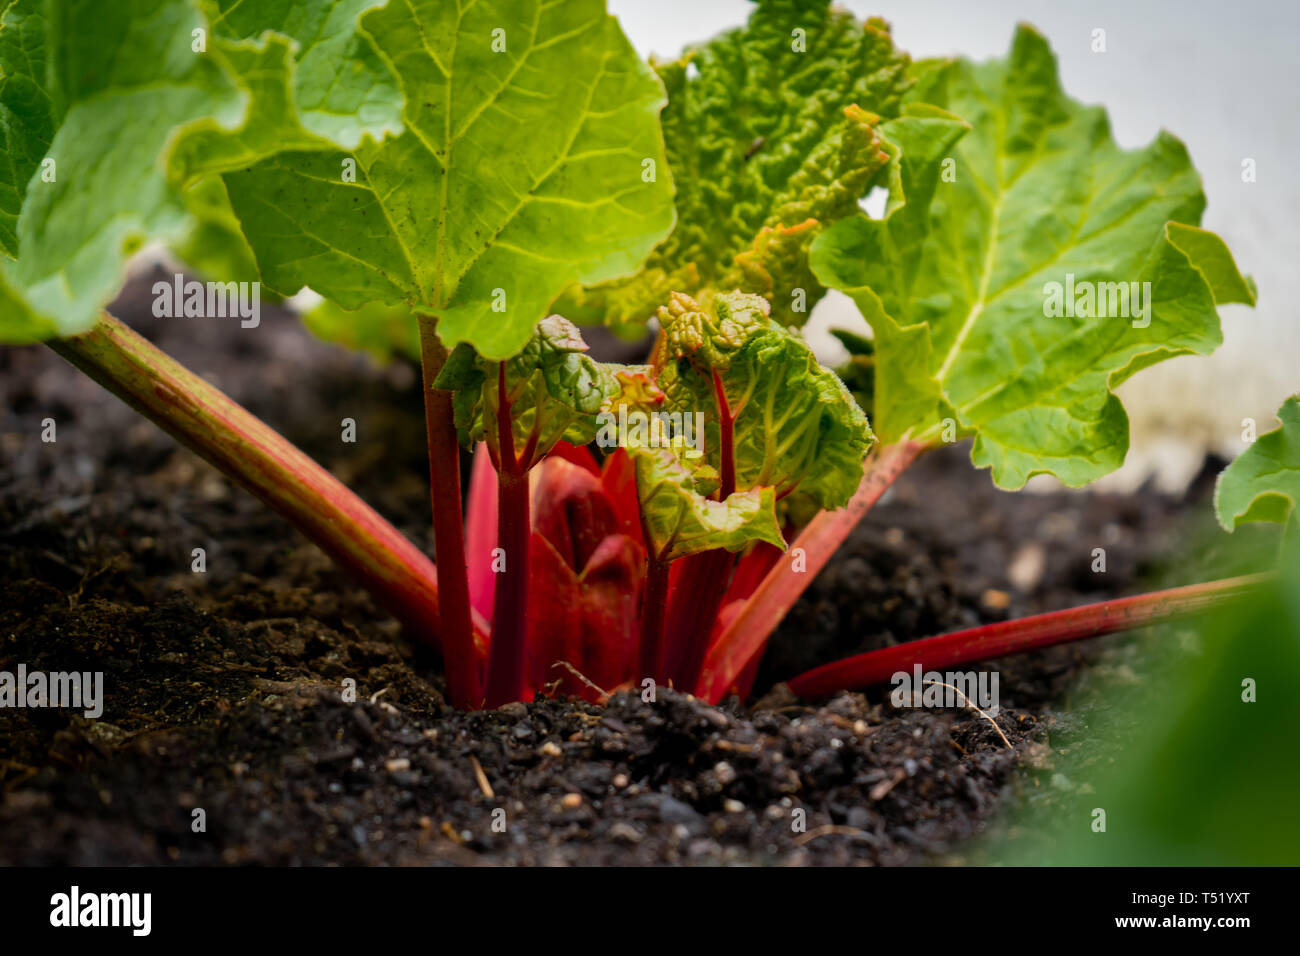 Bright red rhubarb growing in daylight, in a garden, from a rhubarb crown. Rhubarb stalks showing with big leaves, containing oxalic acid. Stock Photo